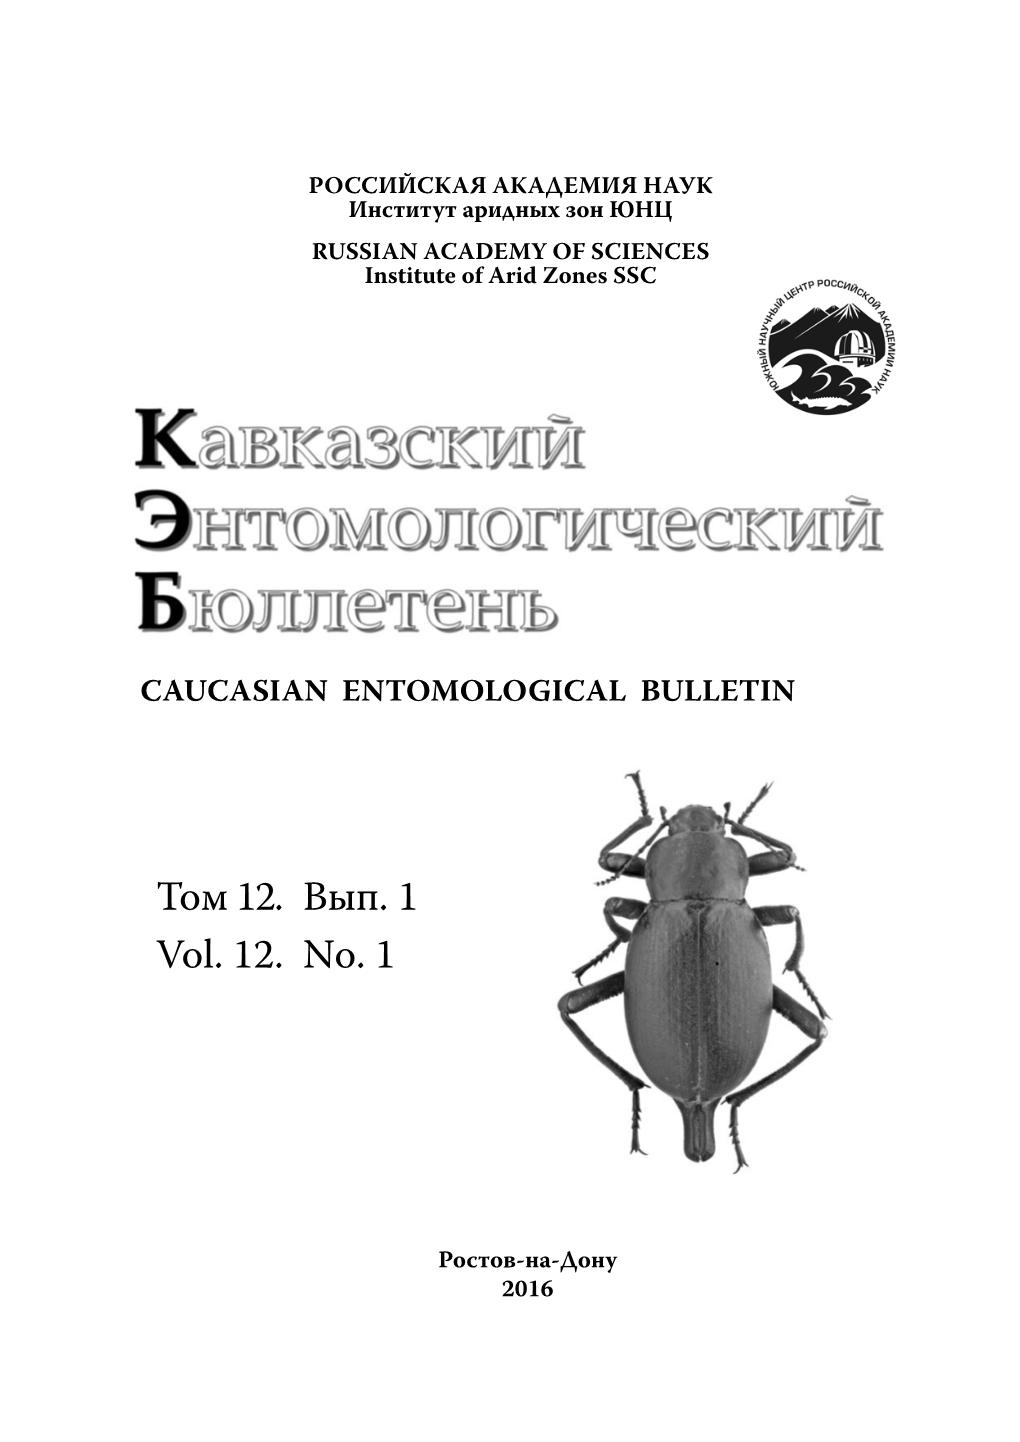 The First Record of Ethmia Discrepitella (Rebel, 1901) (Lepidoptera: Depressariidae) from the Crimean Peninsula, with Notes on Its Bionomy